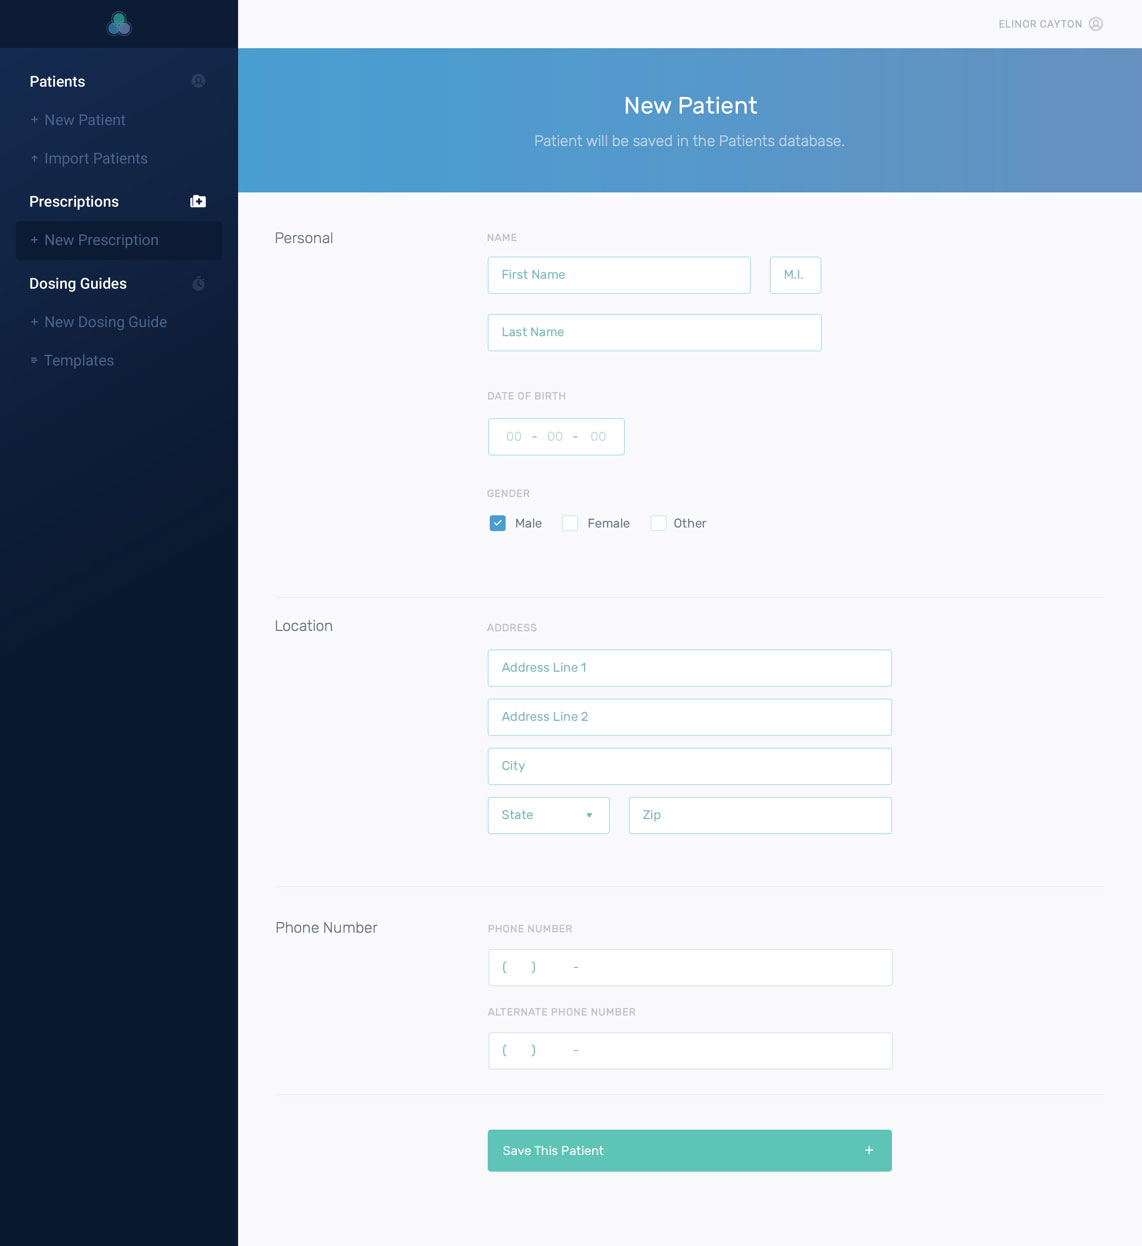 Design of the new patient form in the Daavlin app